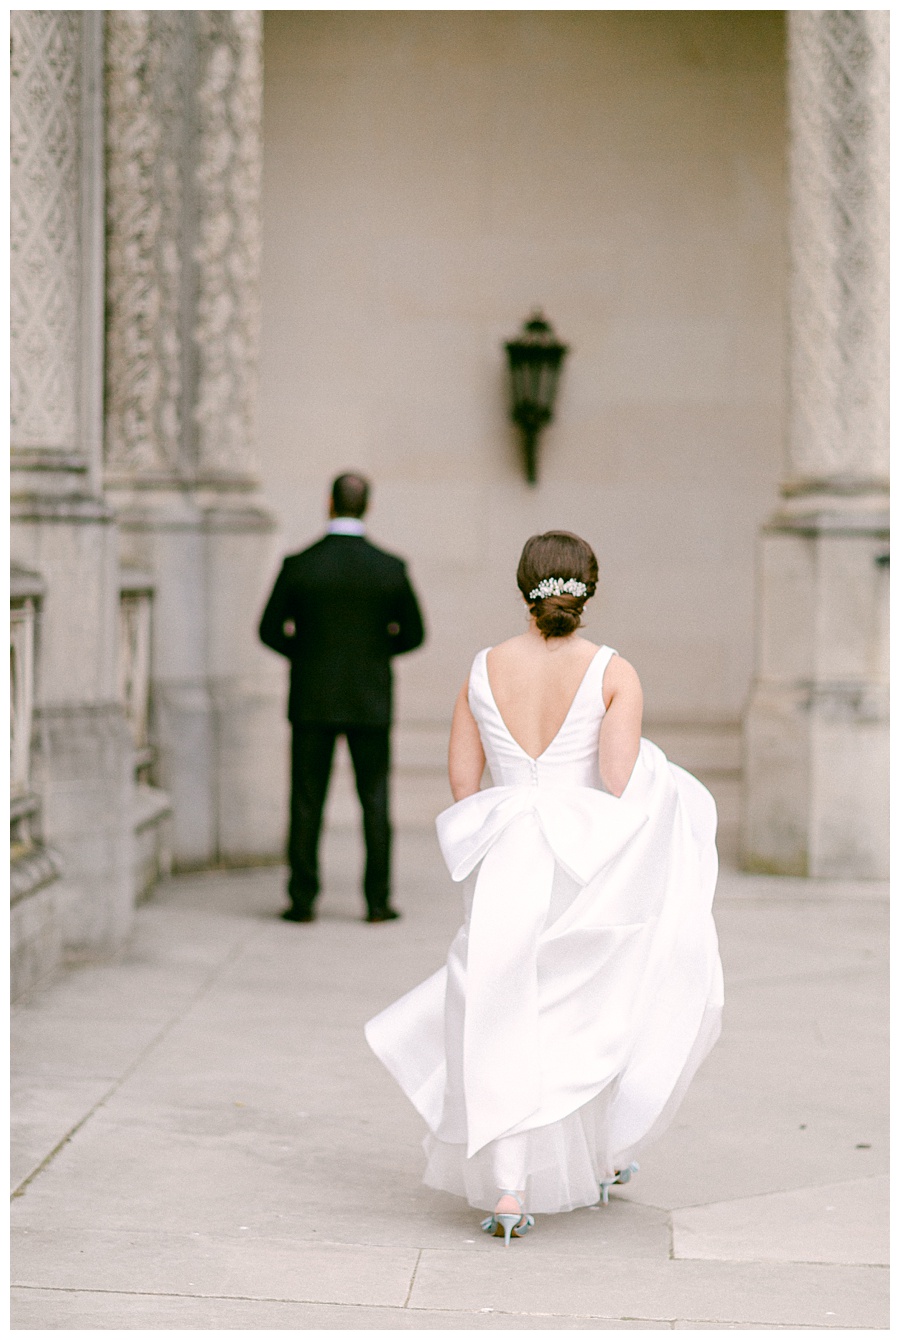 biltmore north carolina, north carolina, biltmore asheville wedding, wedding, biltmore wedding photographer, wedding venue, wedding day, wedding dress, first look, father of the bride, bridal hair, bridal updo